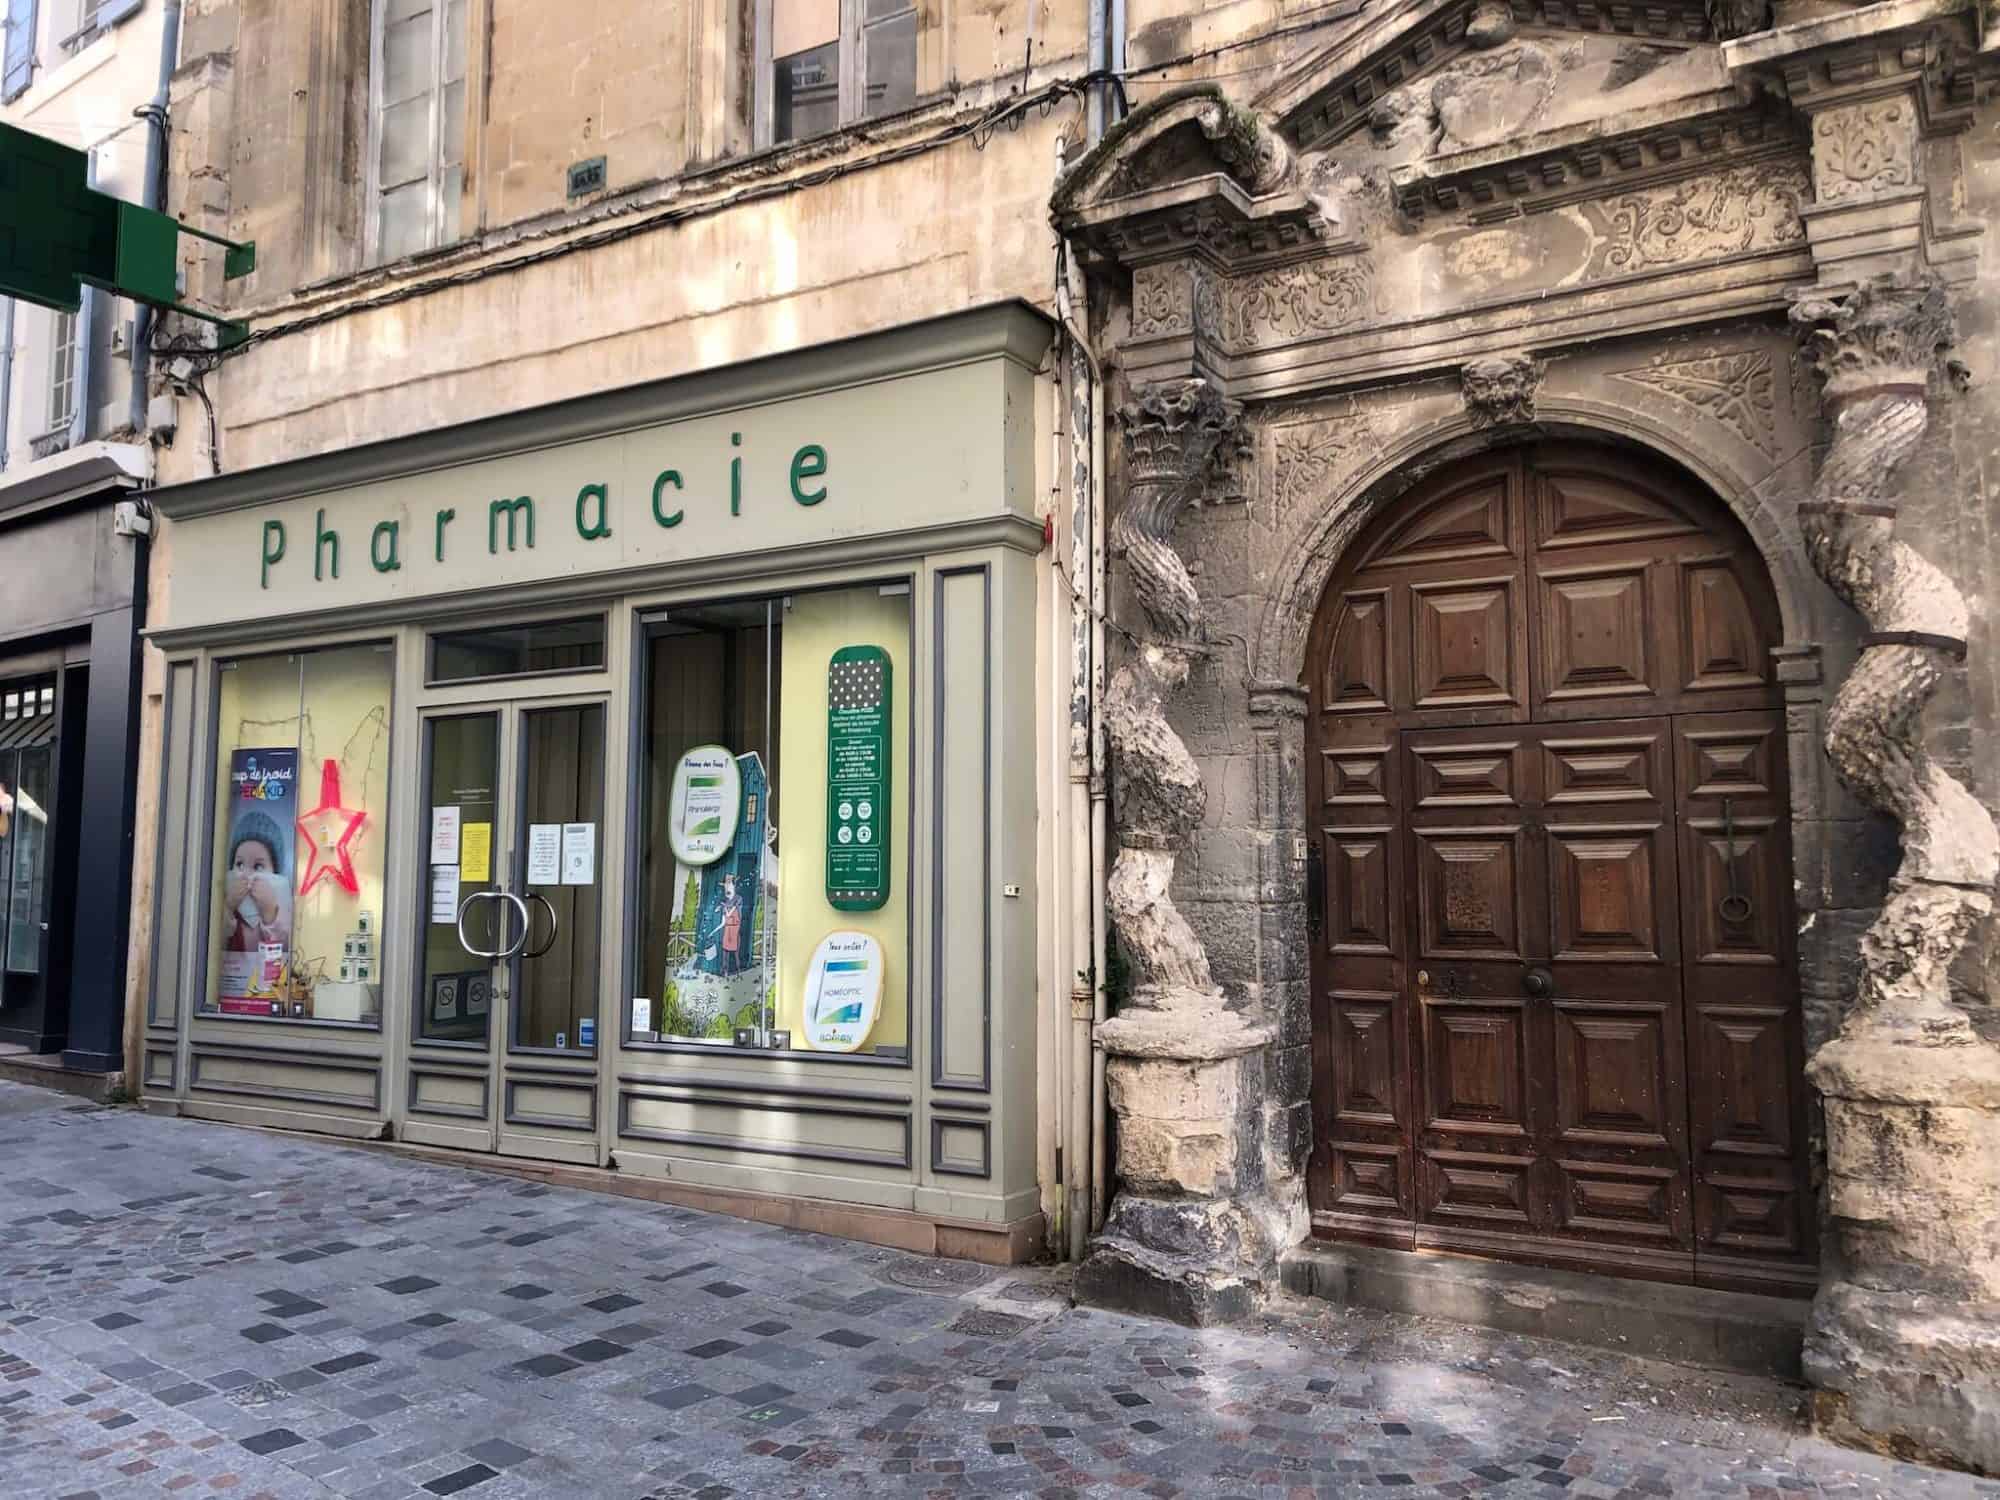 A pharmacie and door to a building on a street in Arles, France.